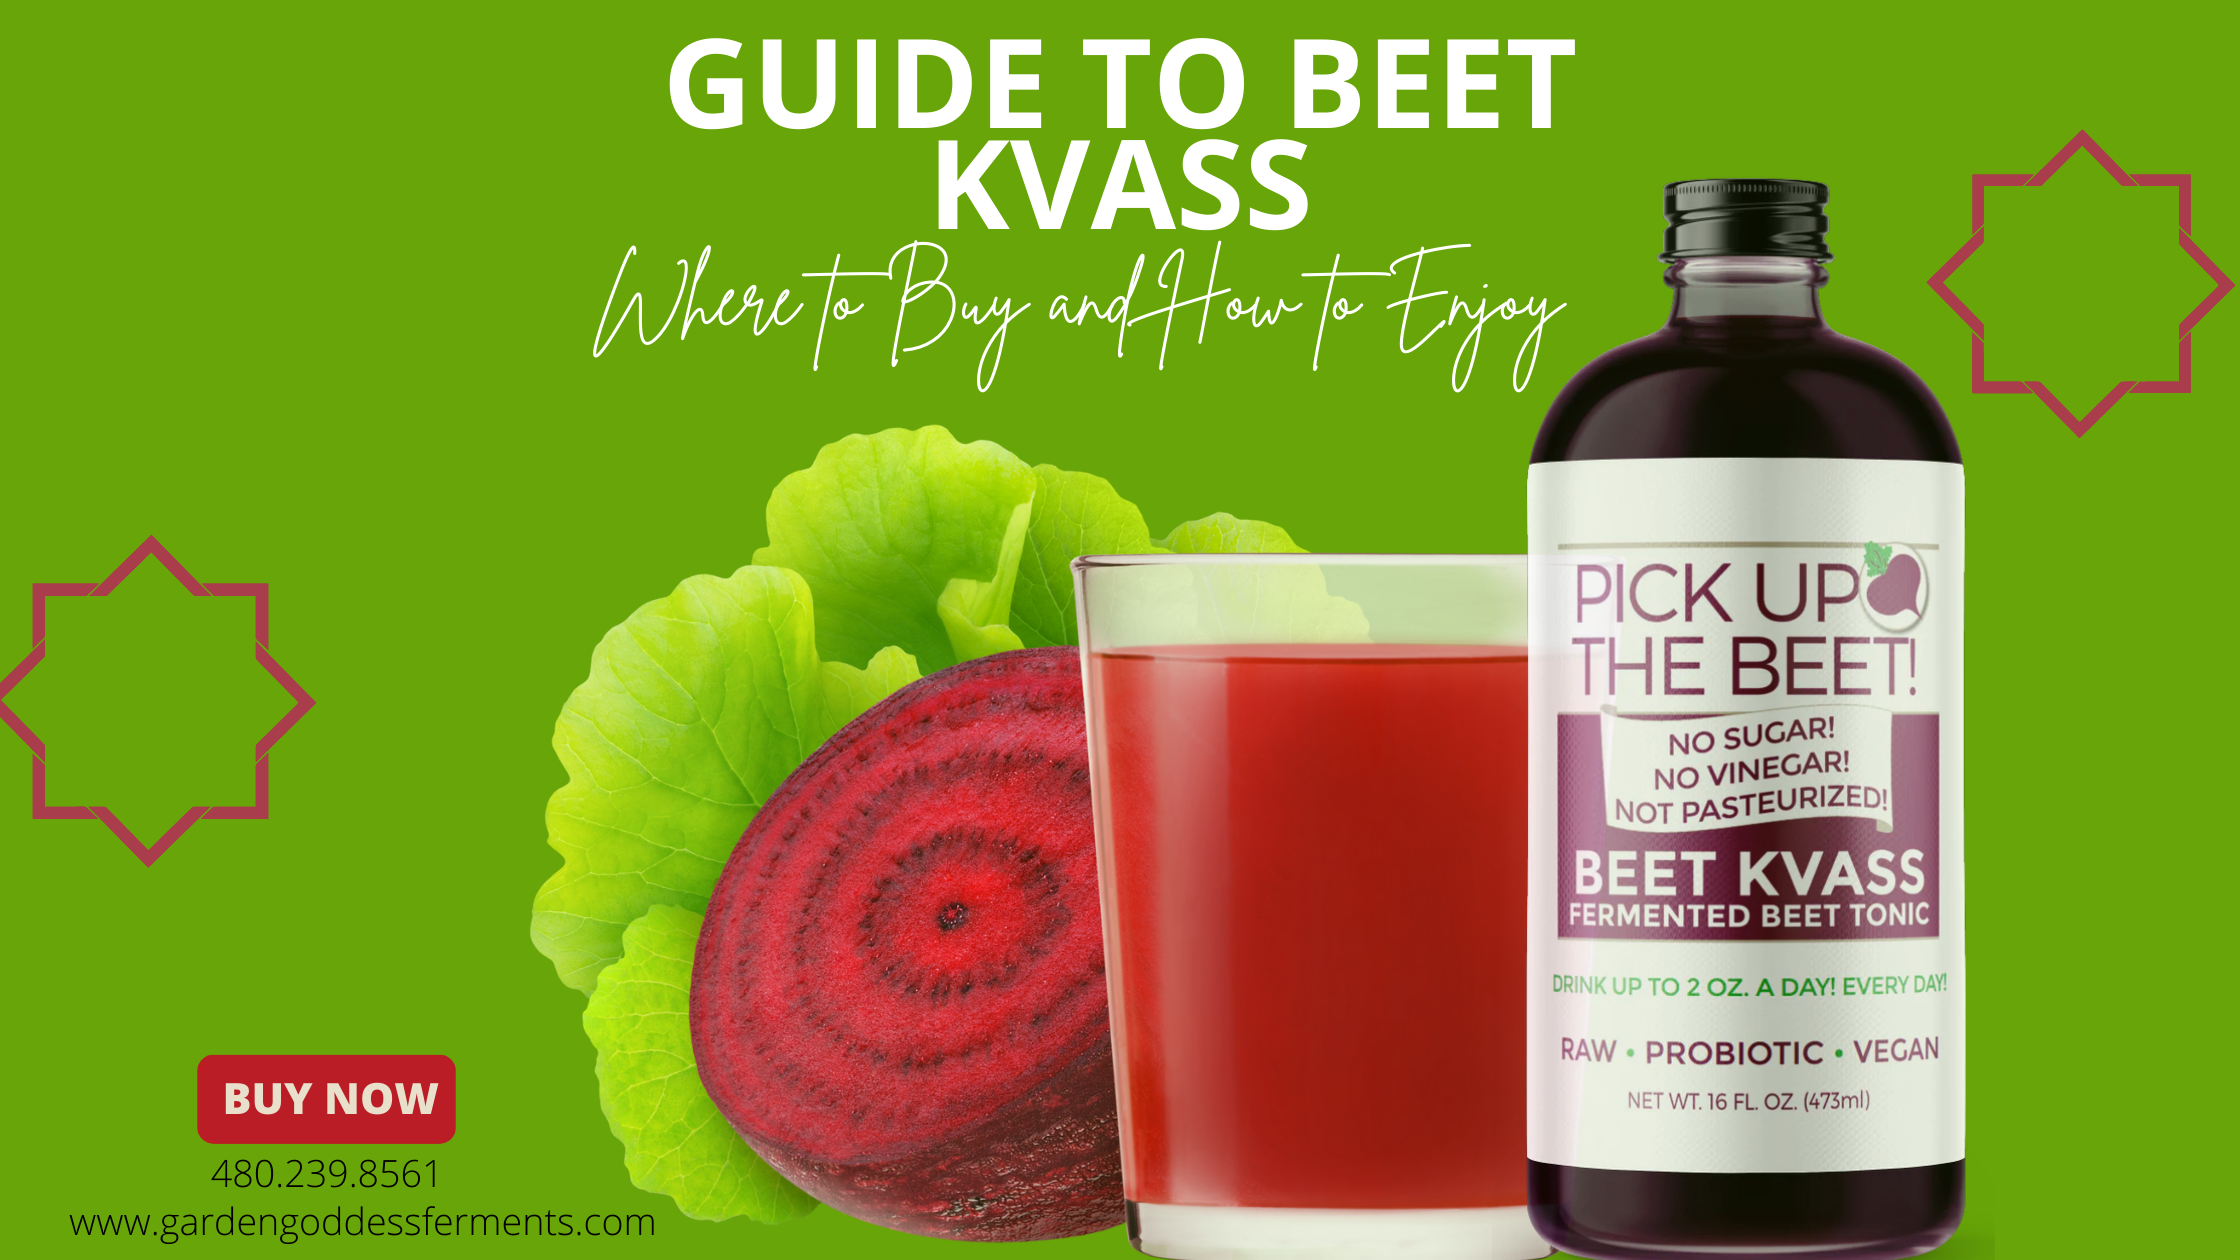 The Ultimate Guide to Beet Kvass: Where to Buy and How to Enjoy | Garden Goddess